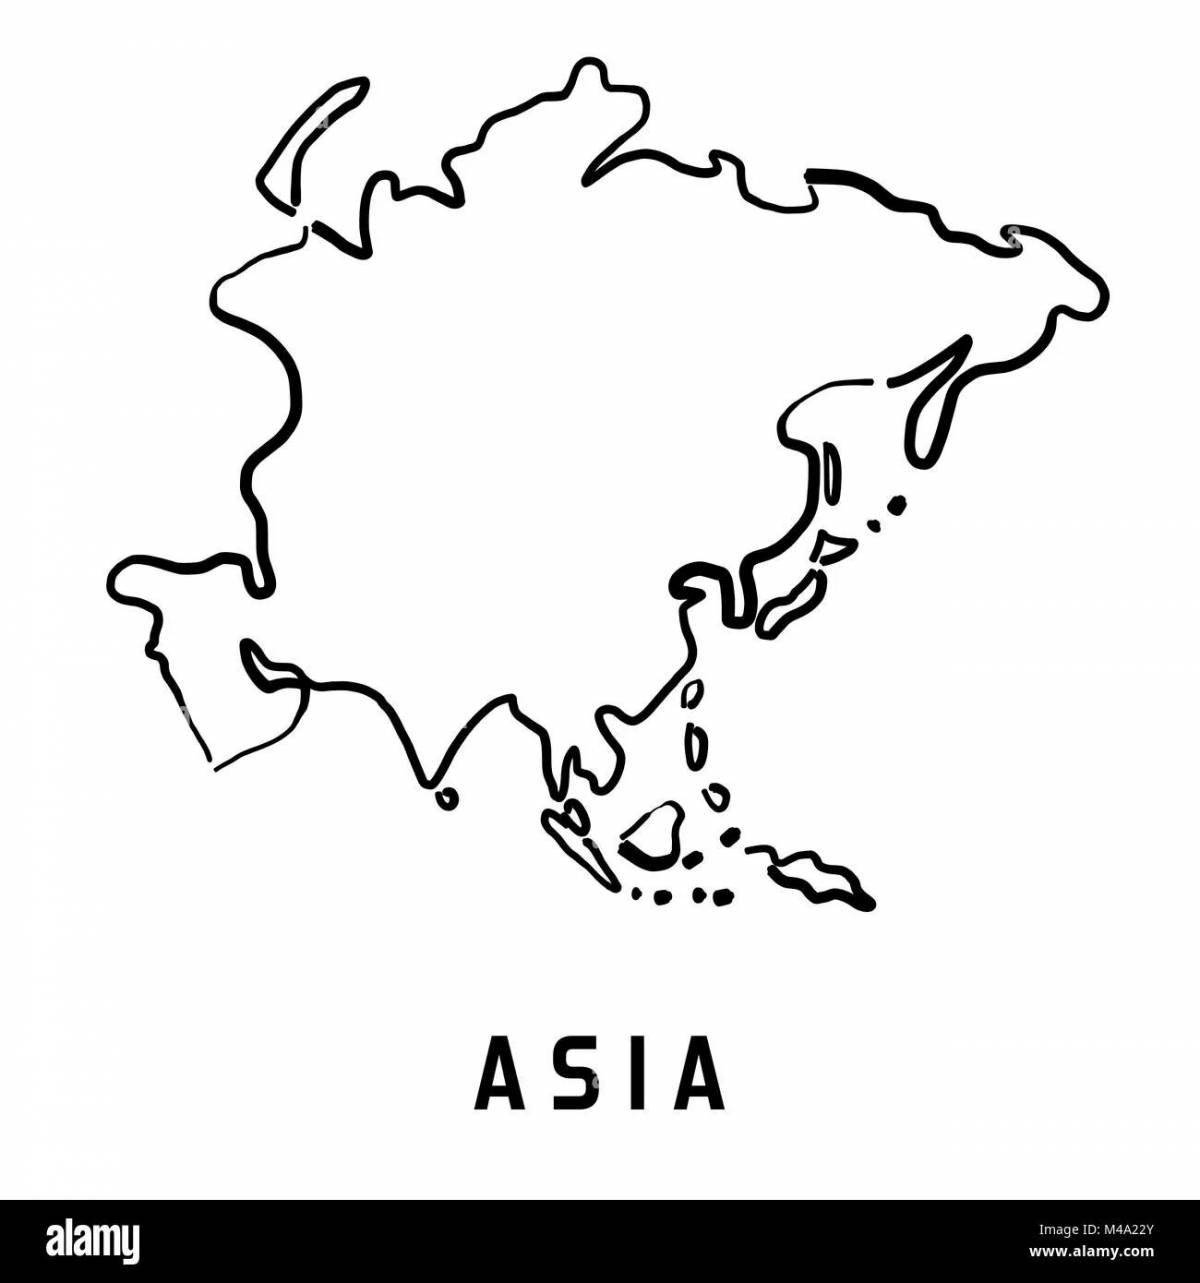 Fascinating asia map coloring page